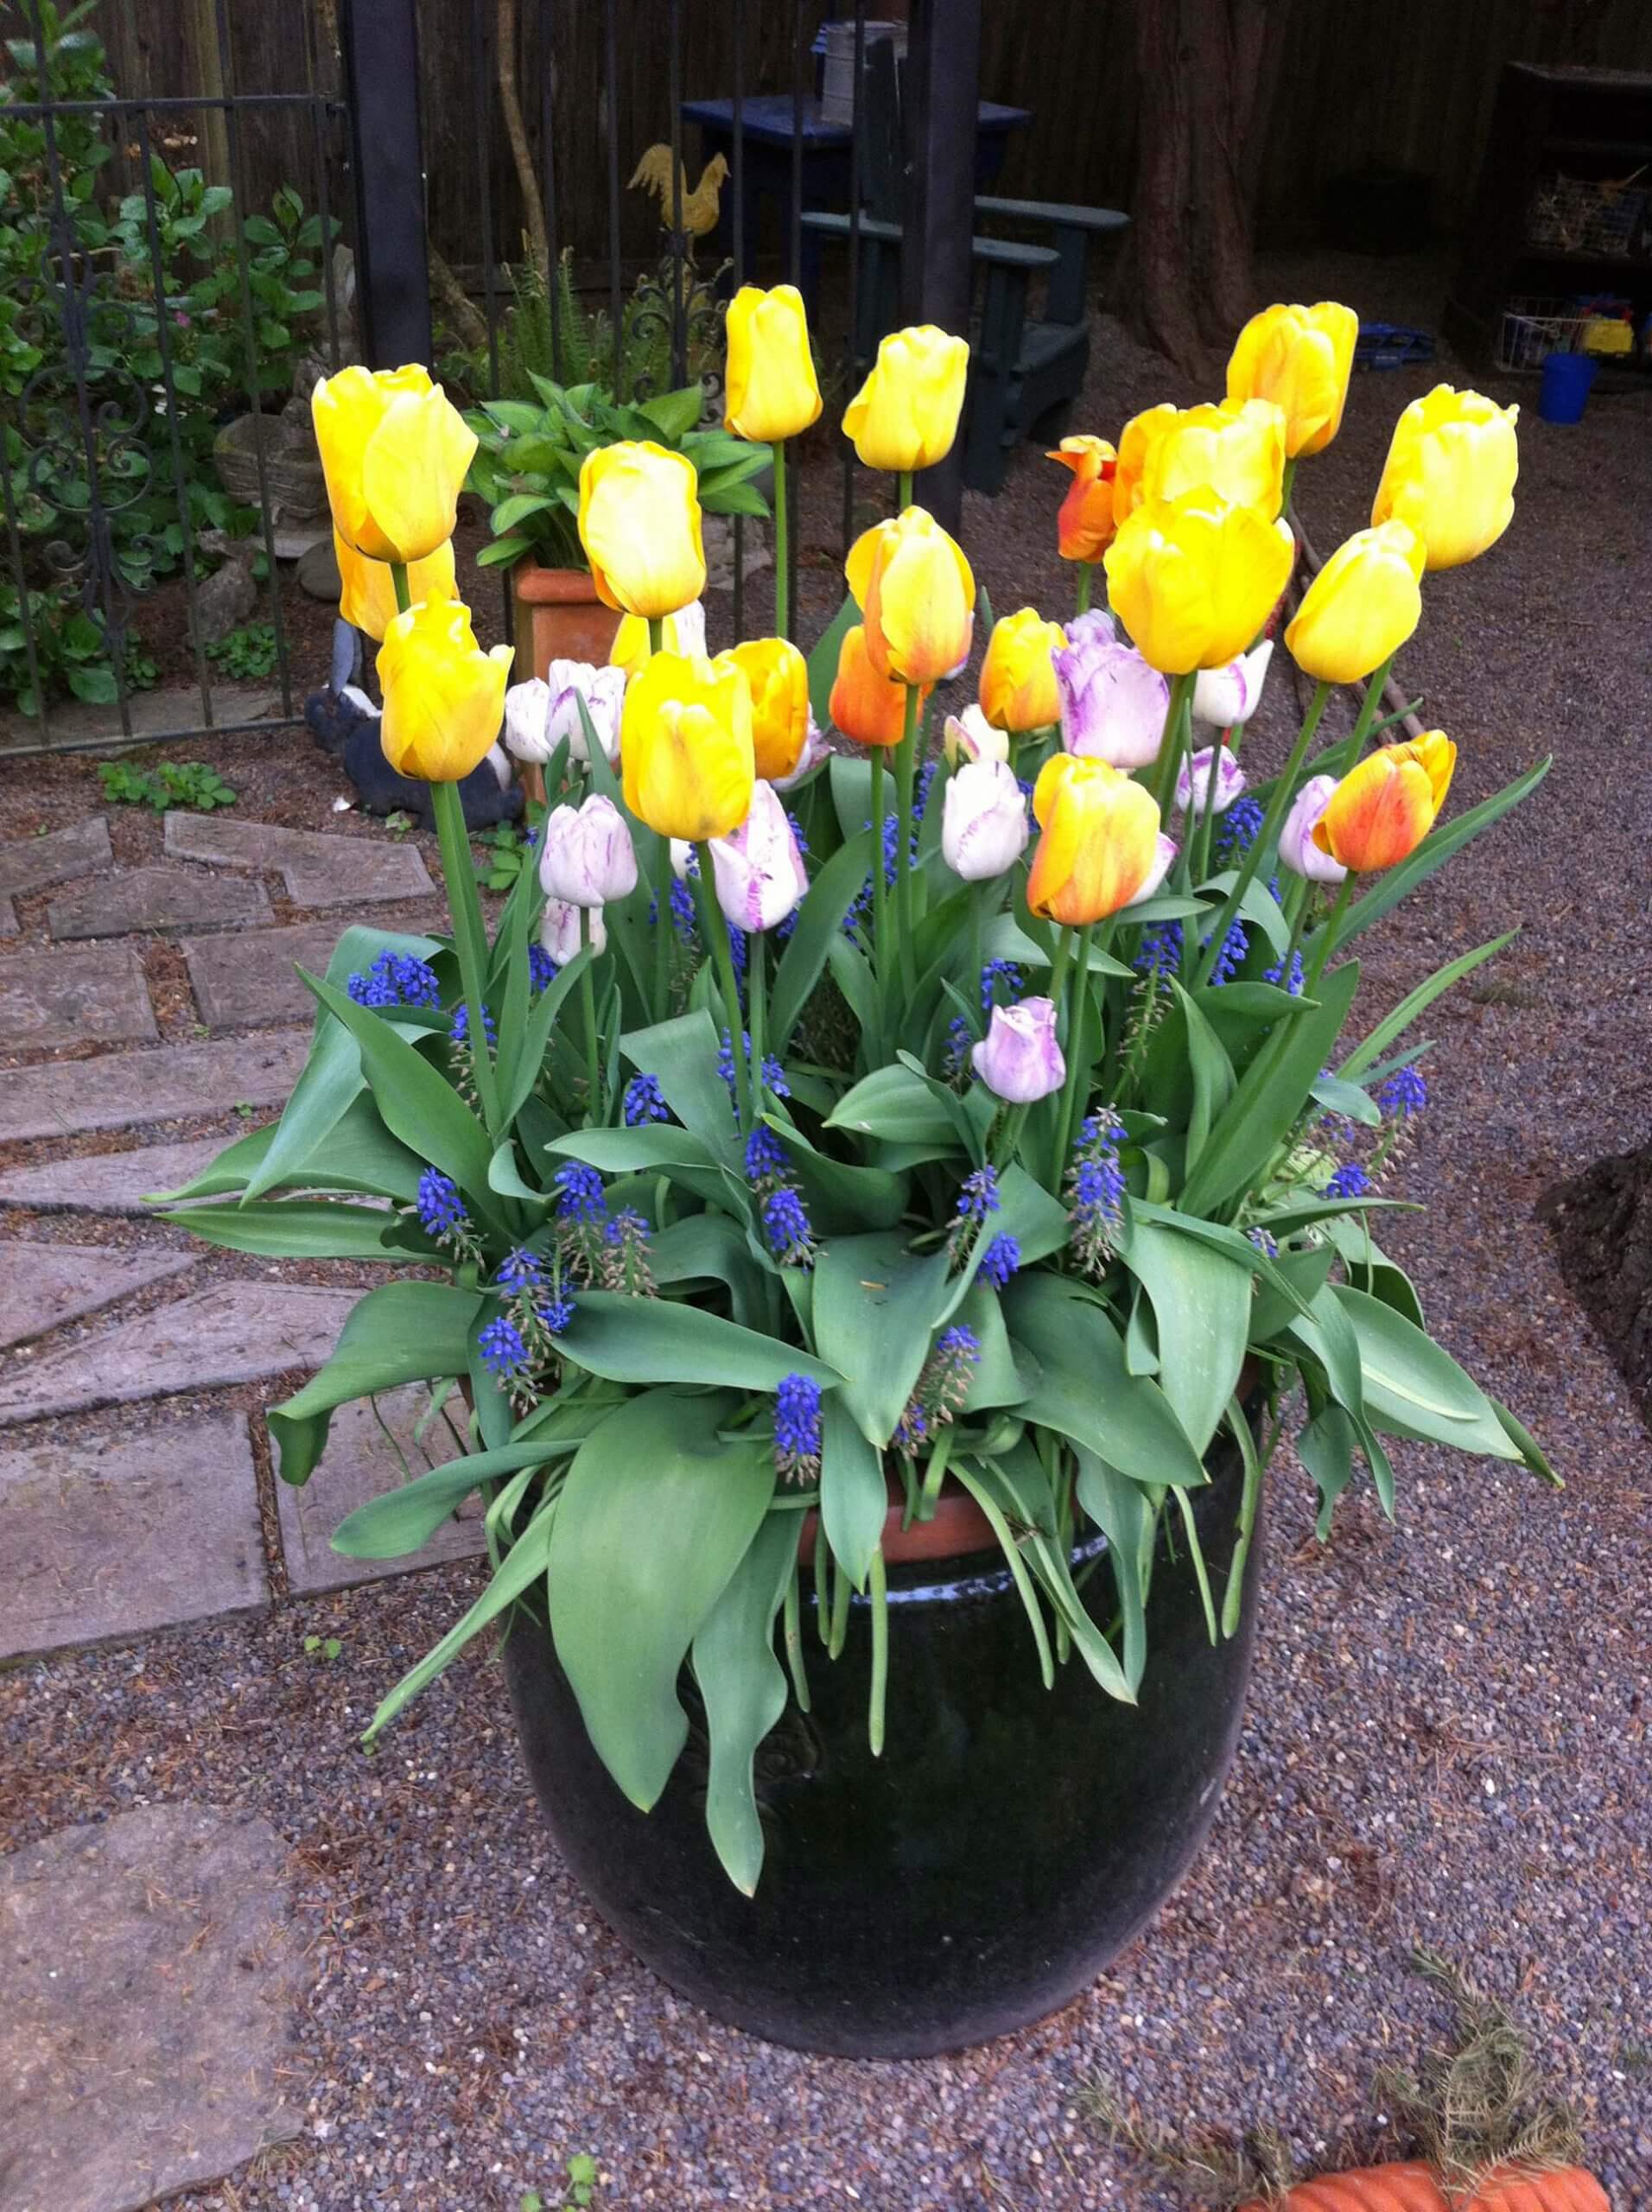 Tulips with grape hyacinths make wonderful spring color containers.